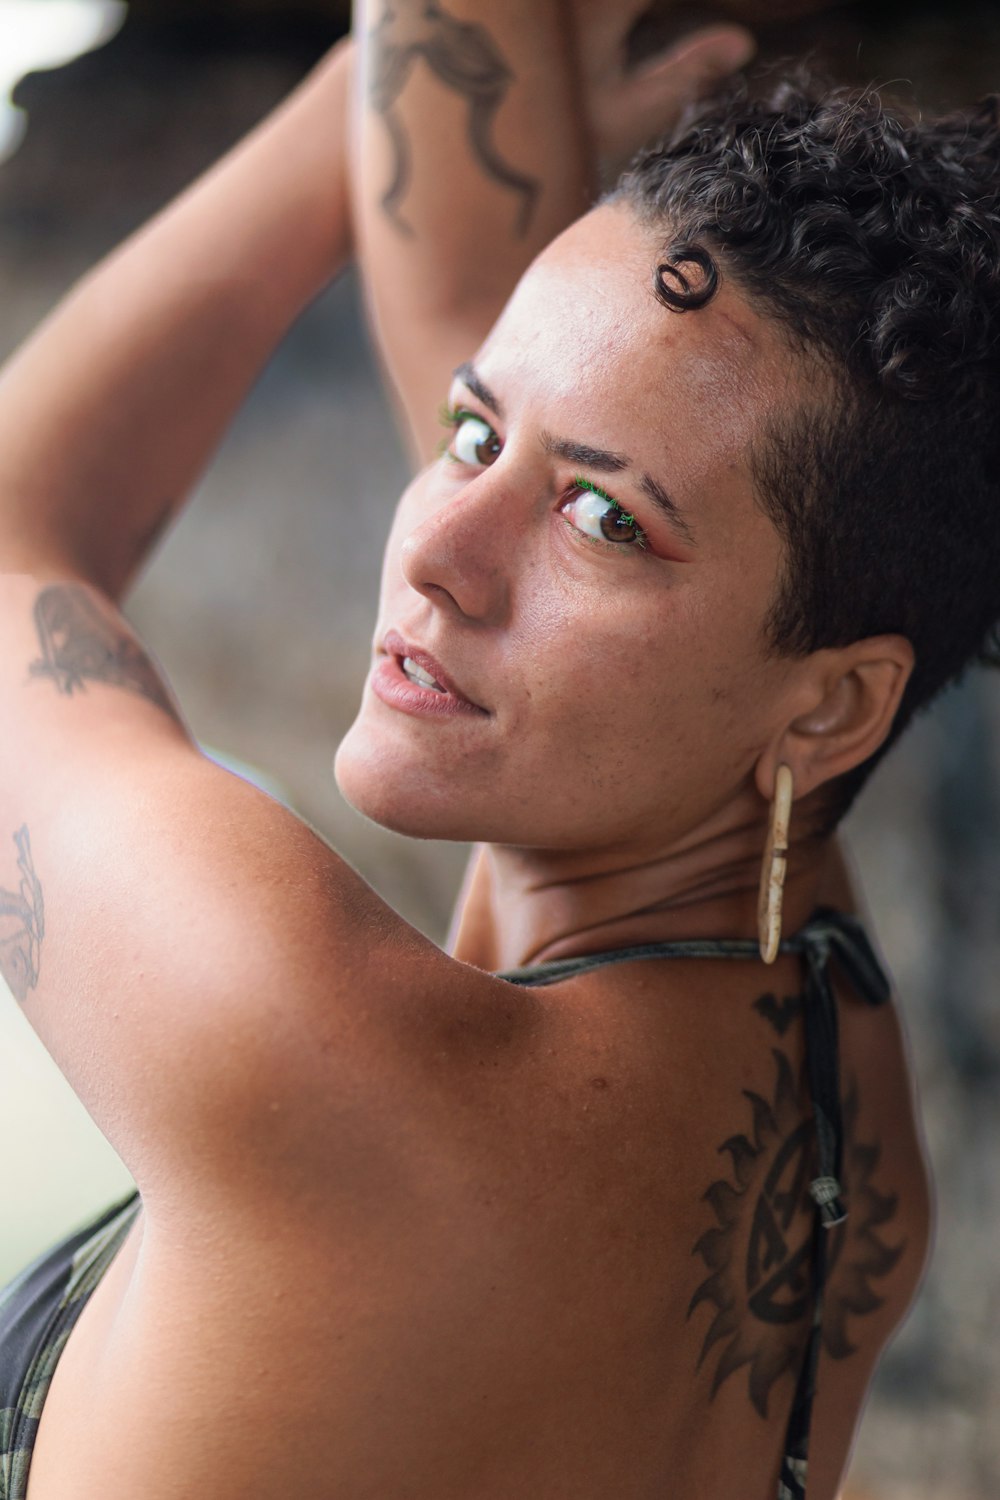 a woman with a tattoo on her chest posing for a picture